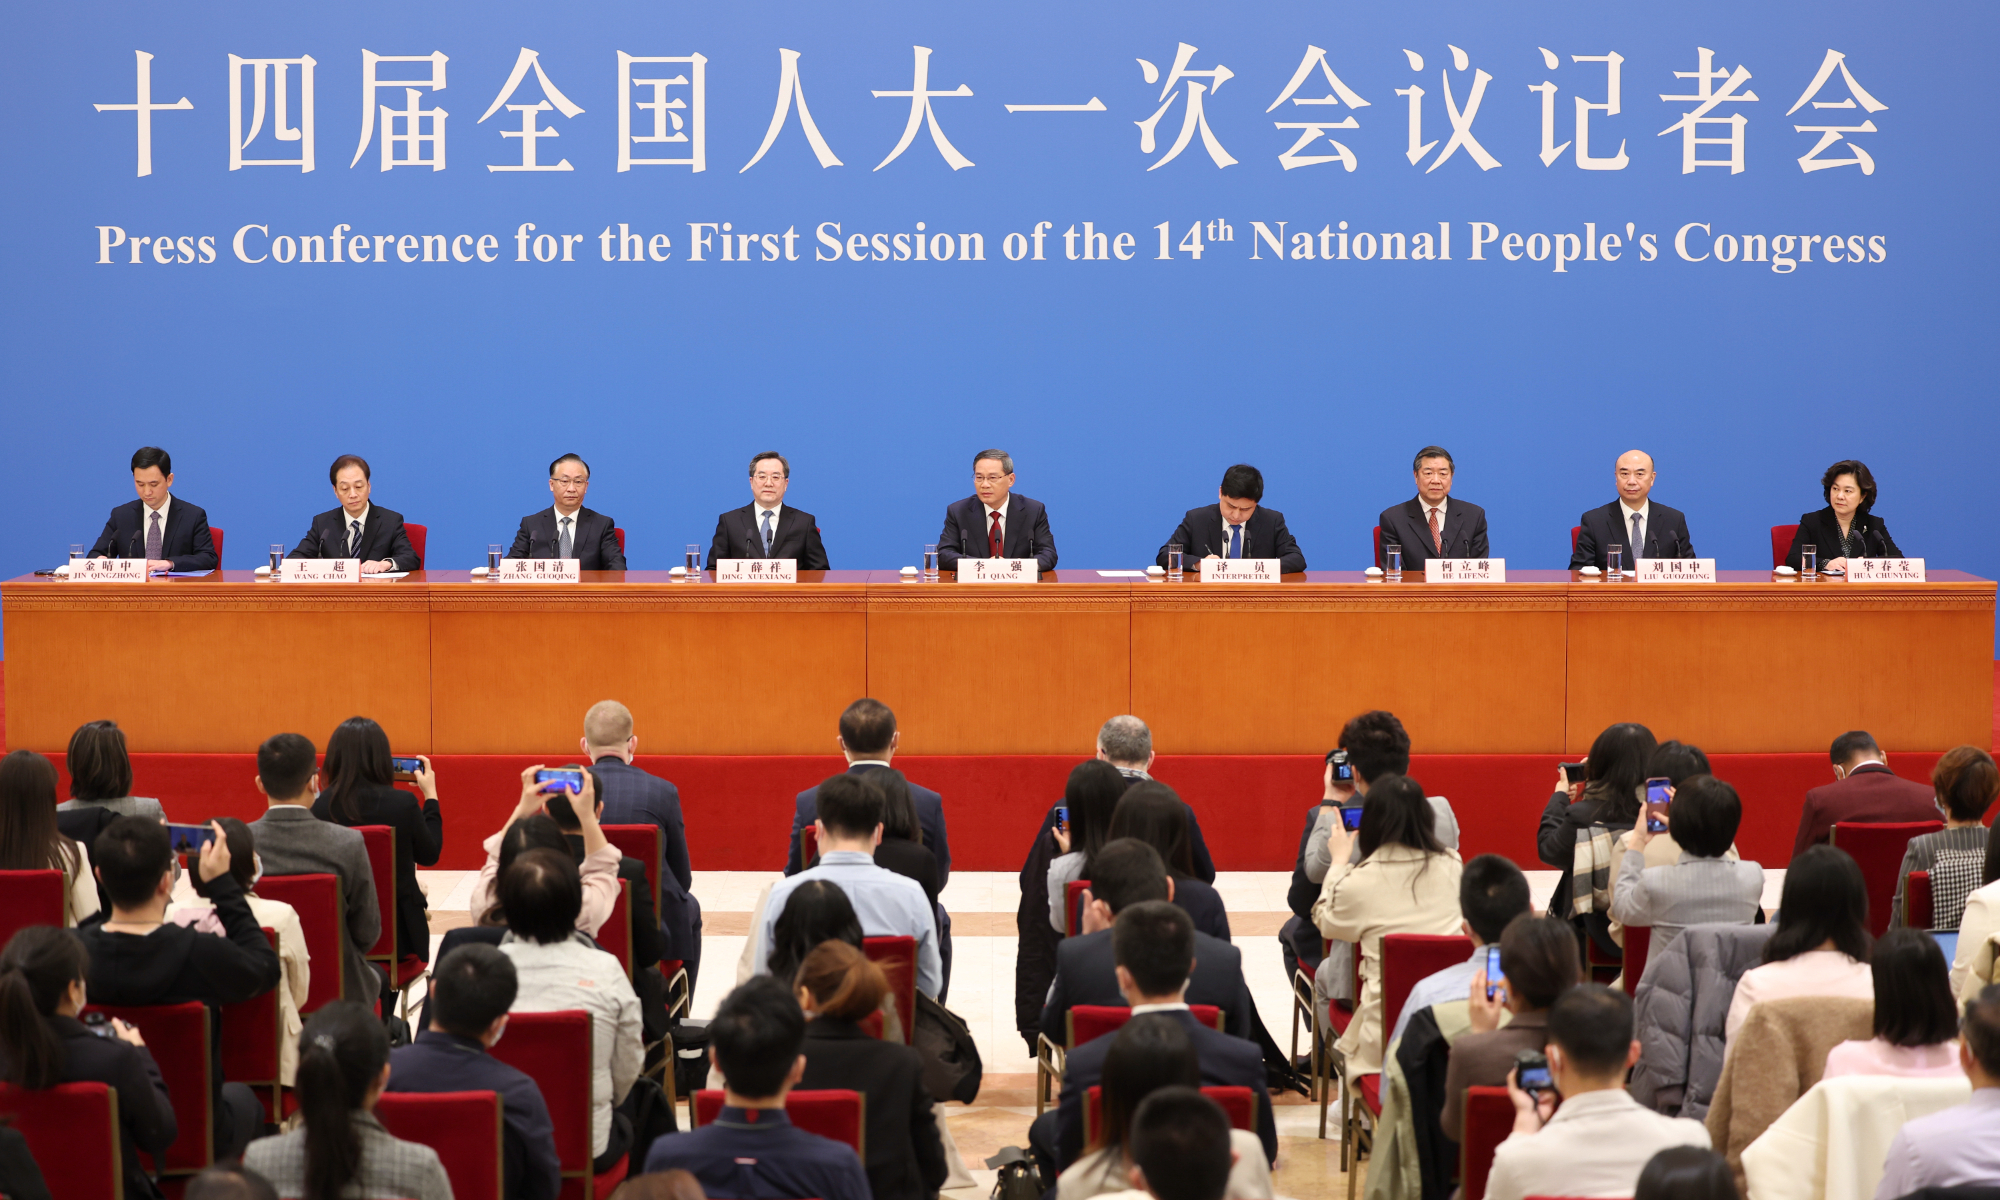 Chinese Premier Li Qiang meets the press after the closing of the first session of the 14th National People's Congress at the Great Hall of the People in Beijing on March 13, 2023. Vice premiers Ding Xuexiang, He Lifeng, Zhang Guoqing and Liu Guozhong attended the press conference. Photo: cnsphoto 